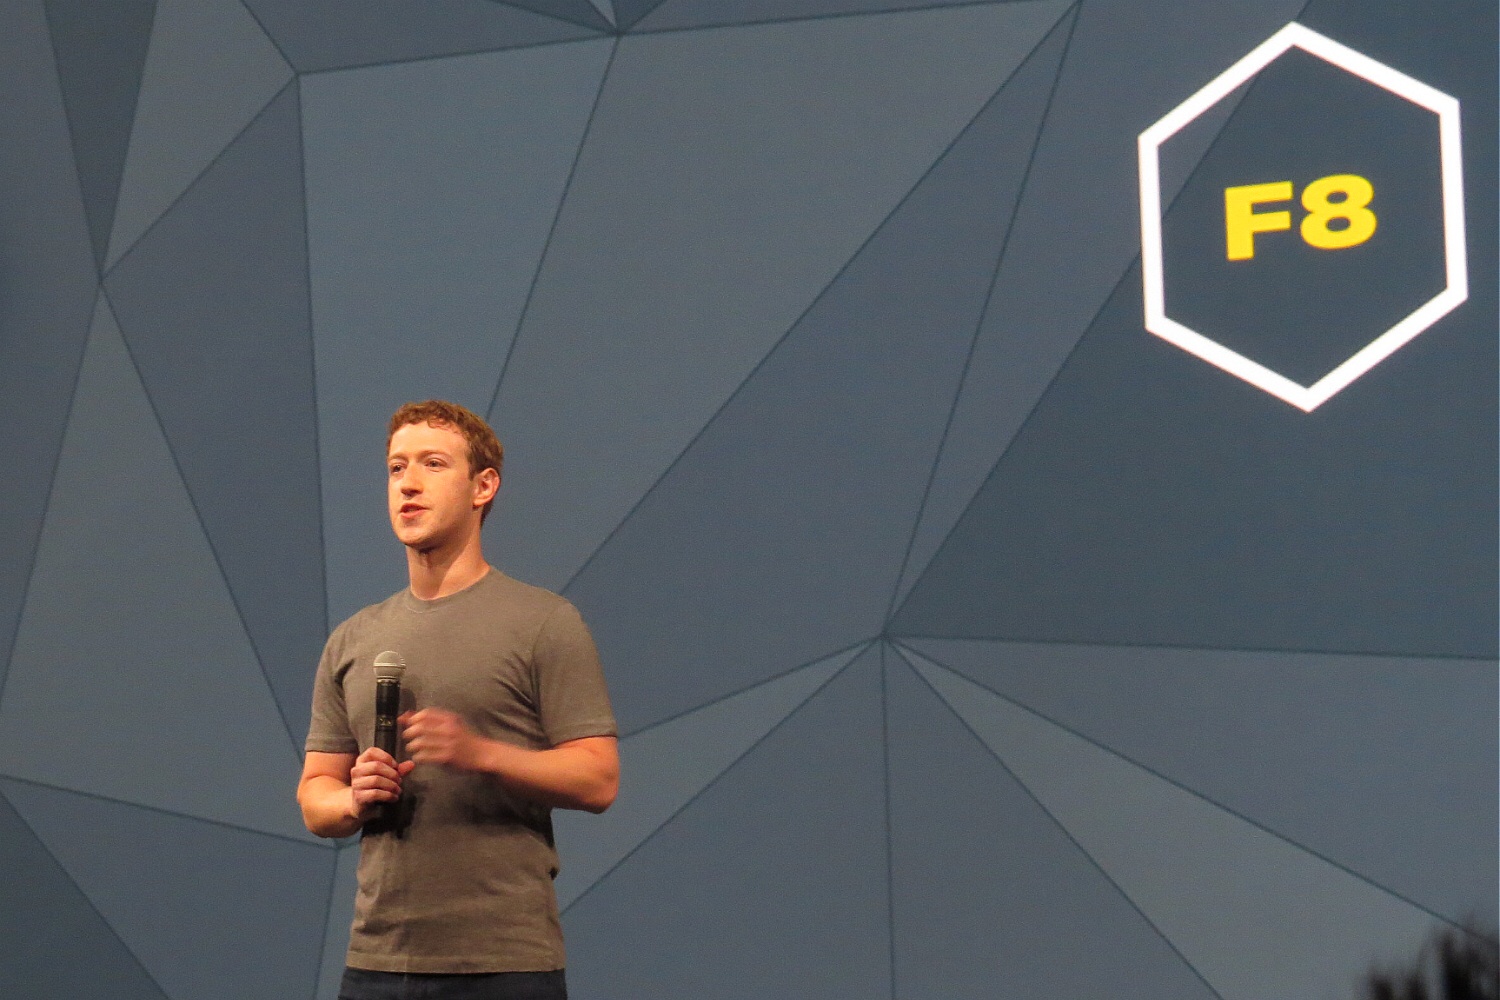 Mark Zuckerberg gives the keynote at Facebook's f8 conference in San Francisco on April 30, 2014 (Harry McCracken / TIME)